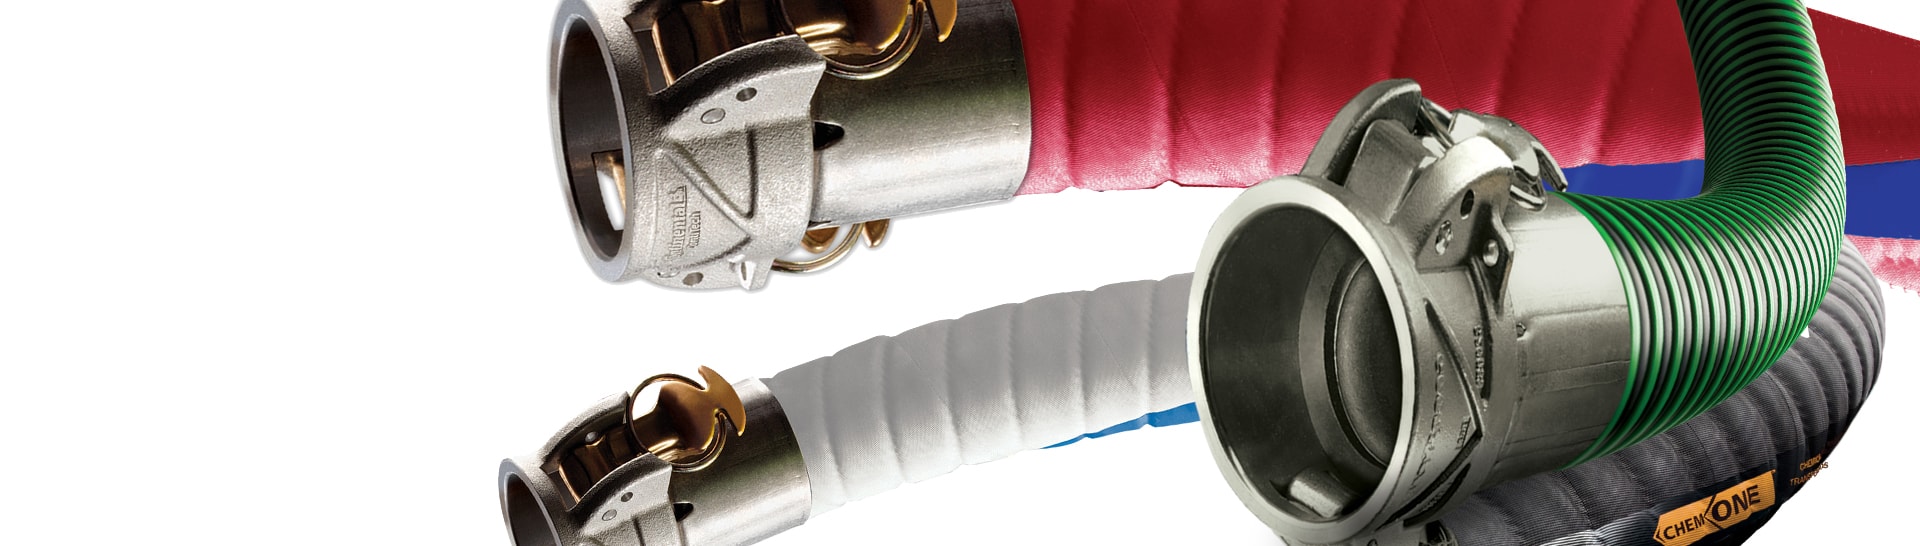 This is a close up image of various hoses with fittings attached.